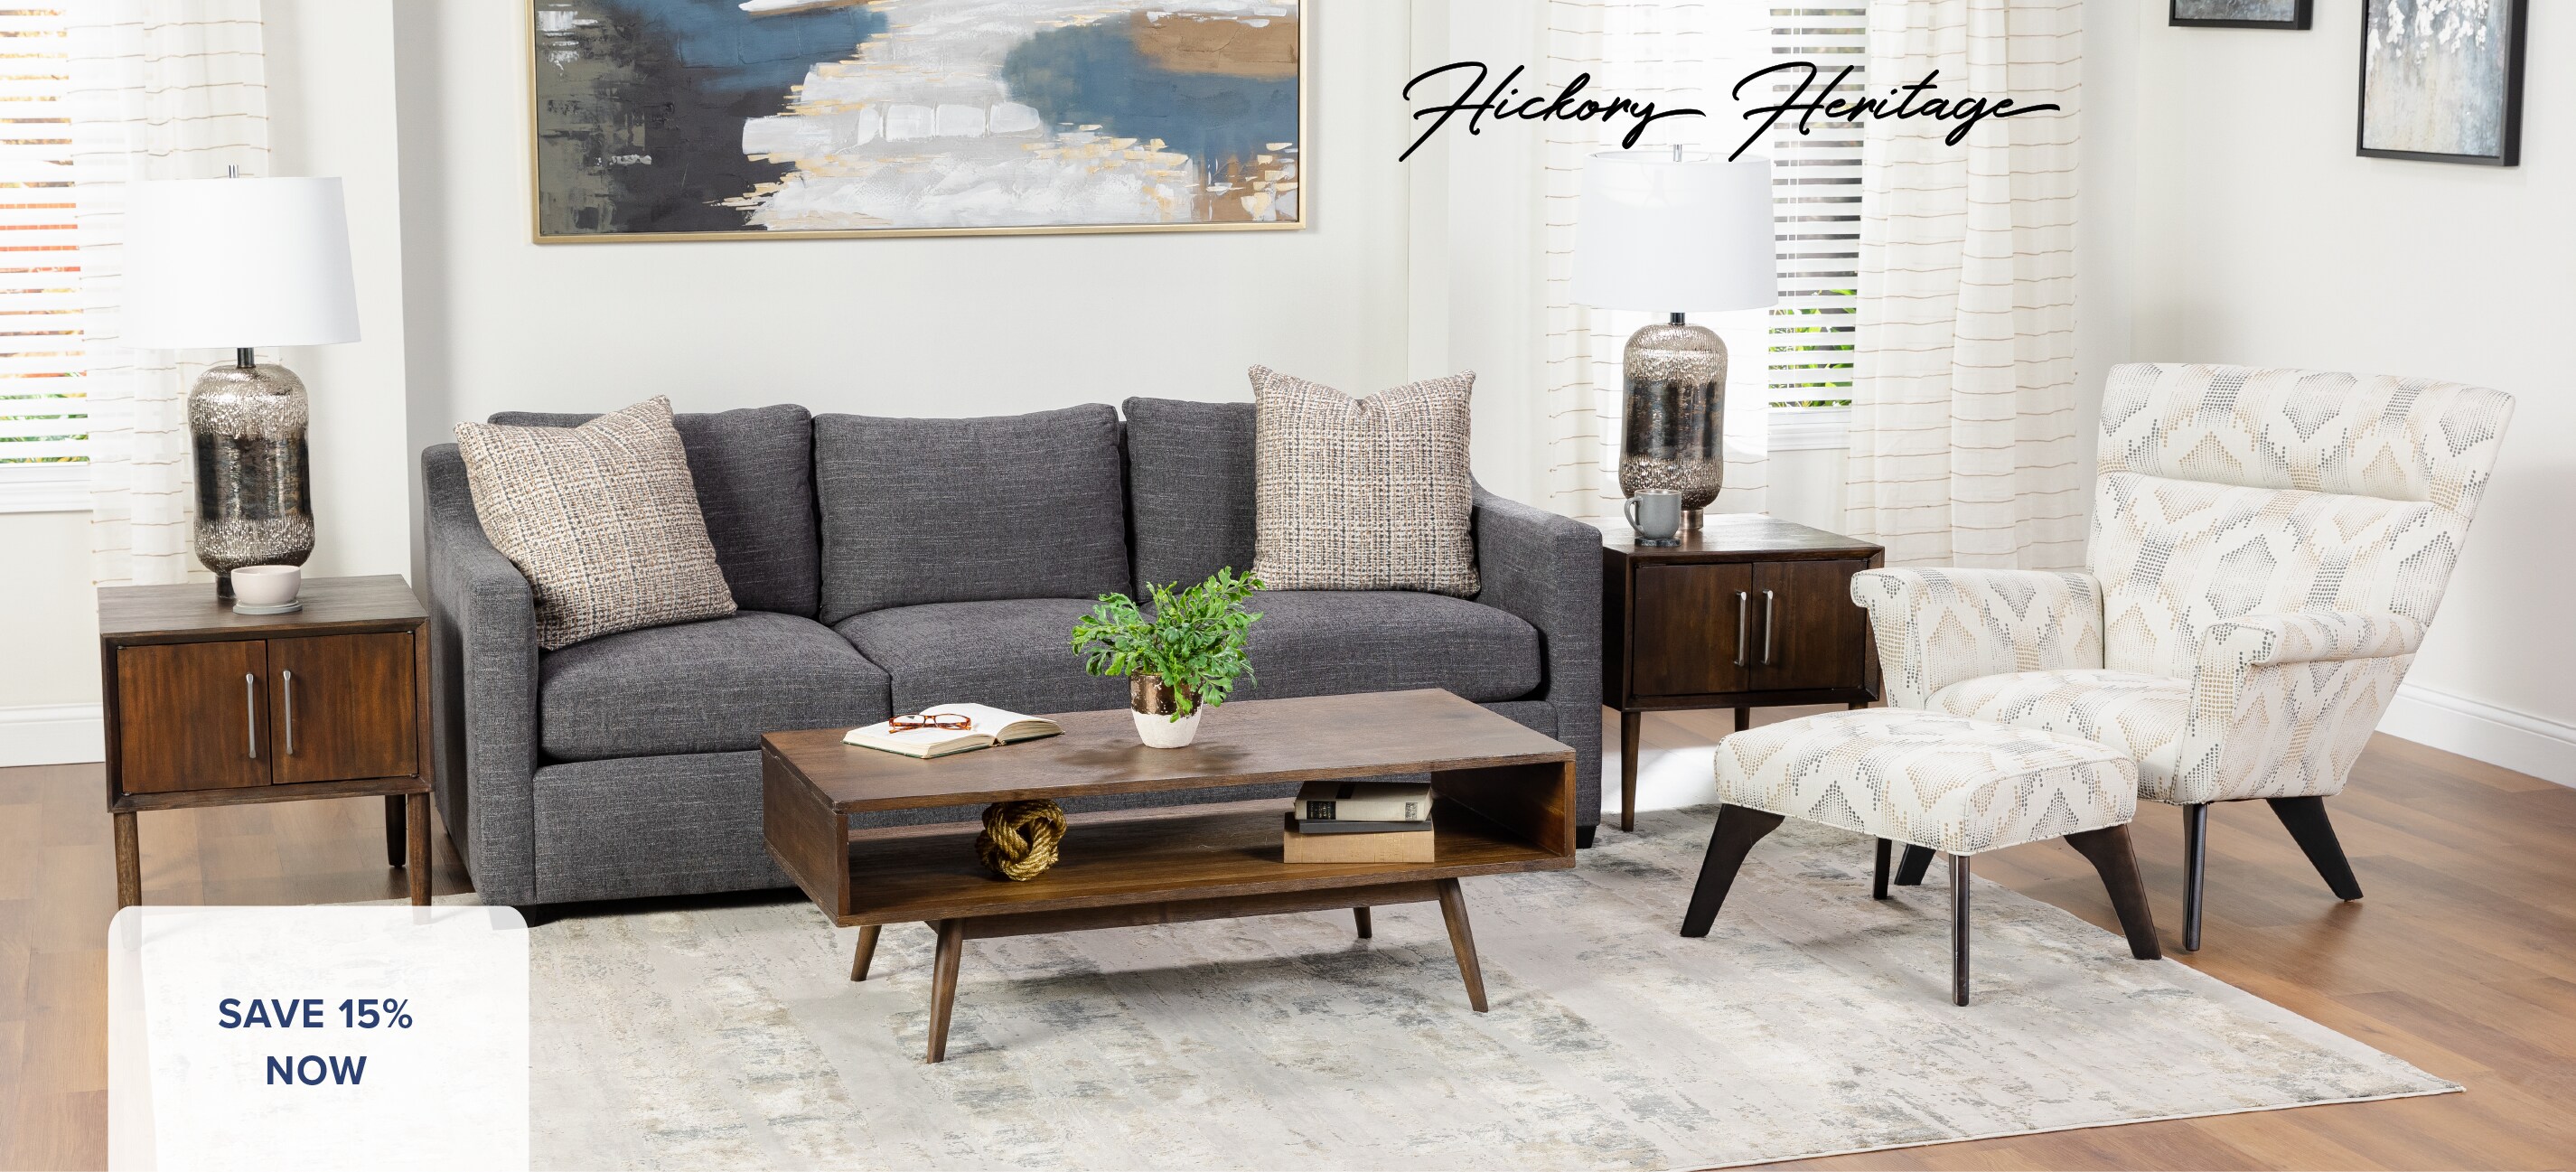 Save 15% on Hickory Heritage